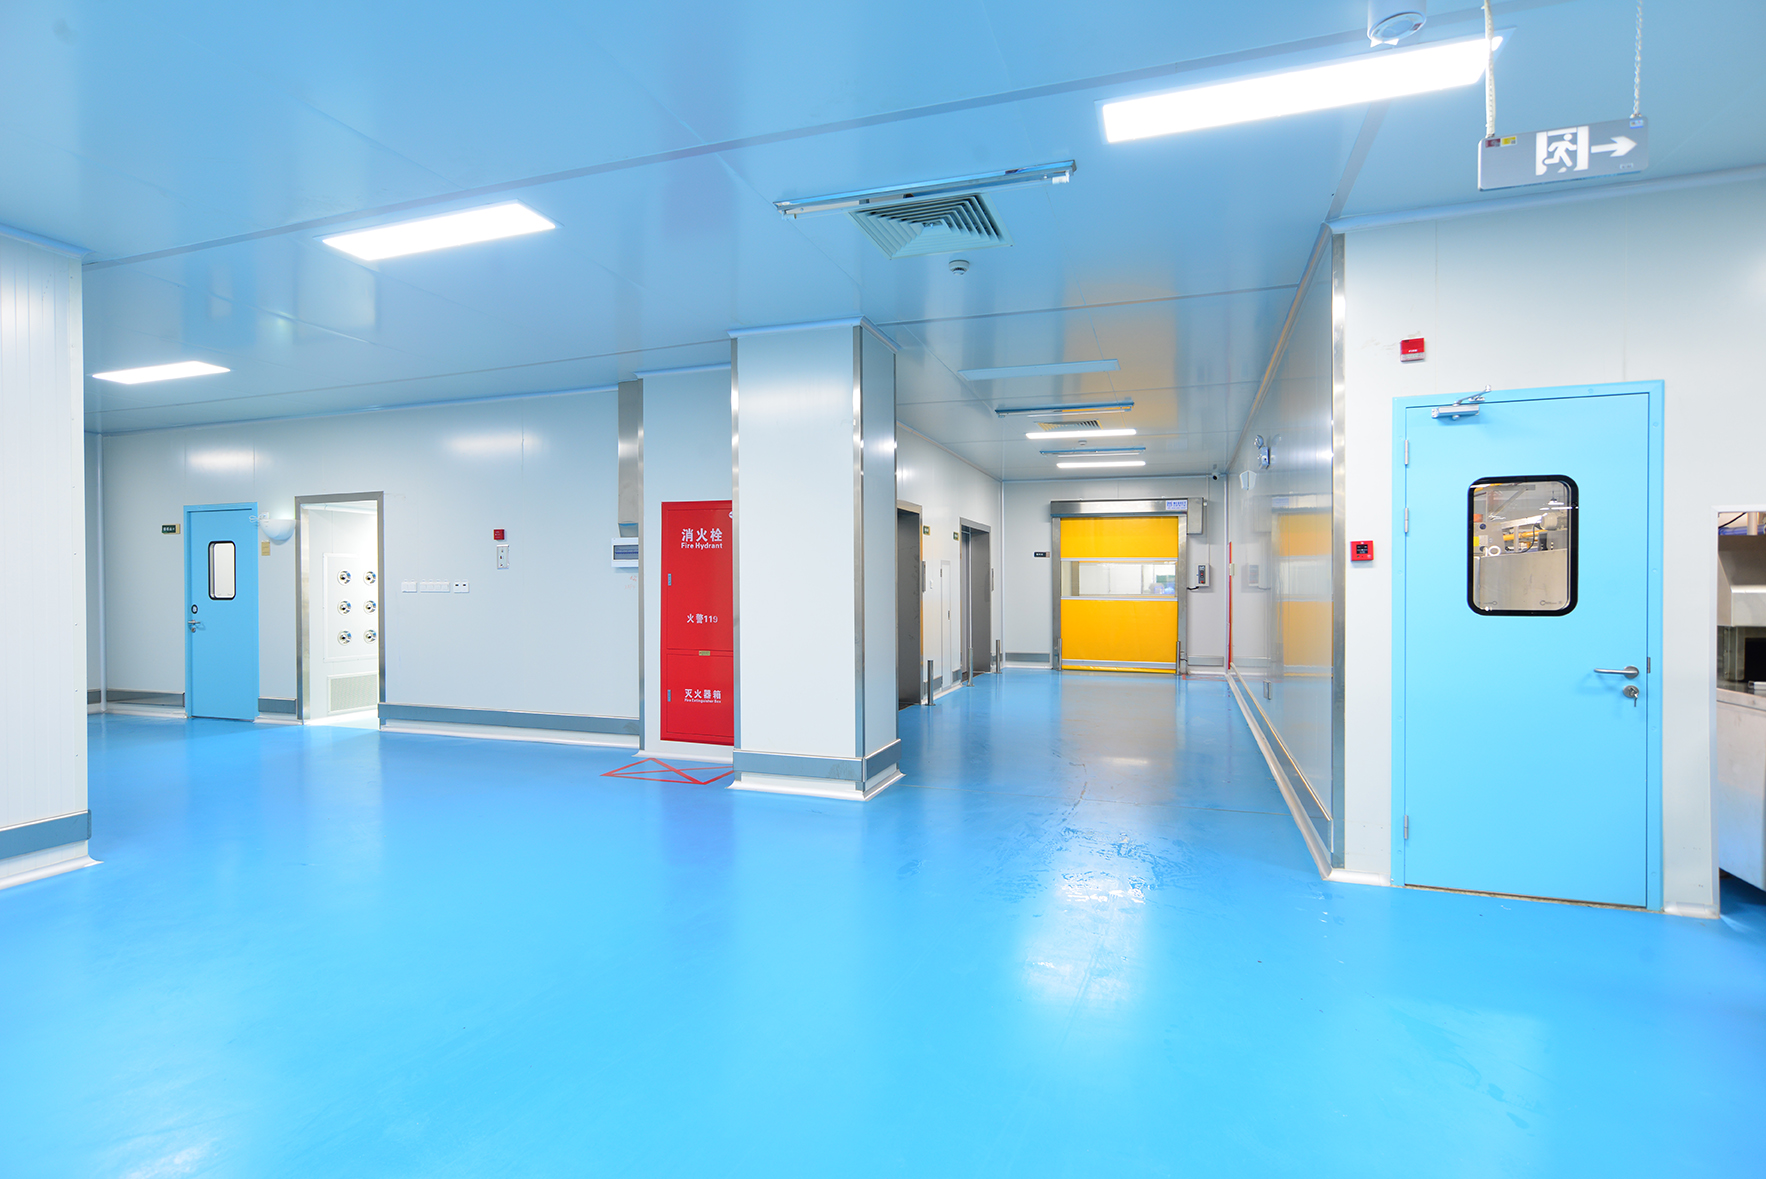 Why choose BSL clean room wall system?